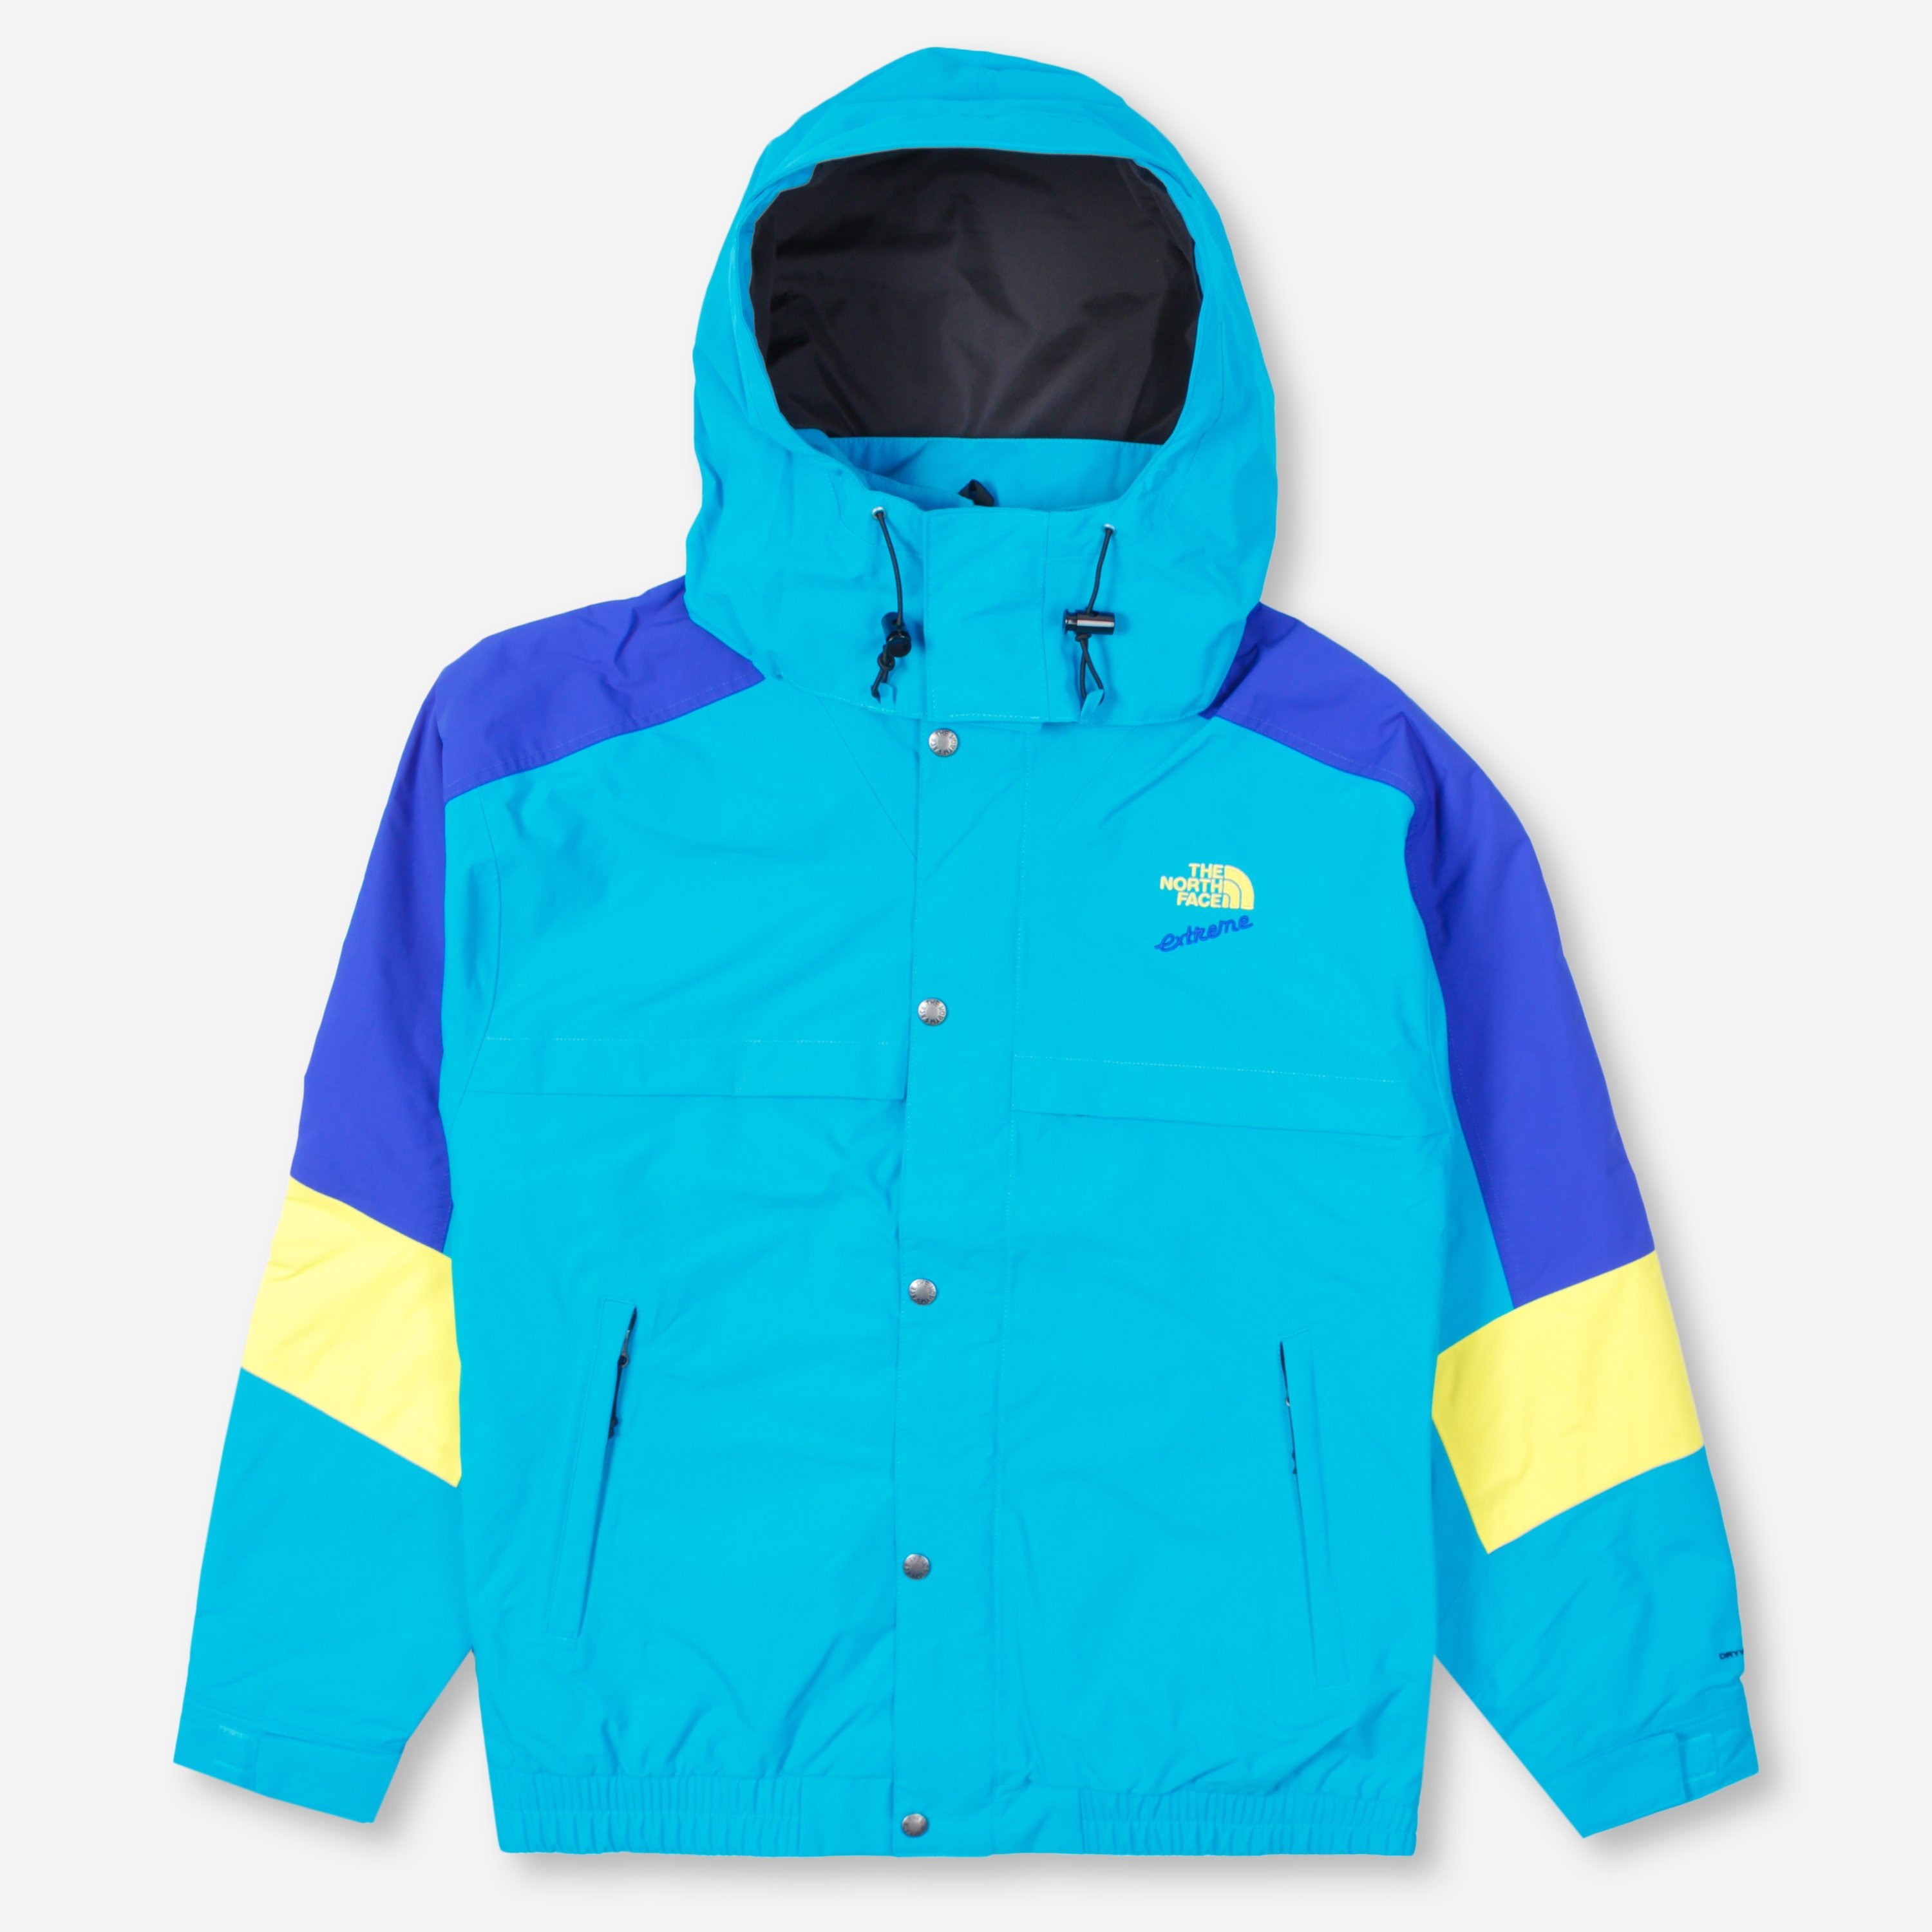 The North Face 92 Extreme Rain Jacket | The Hip Store